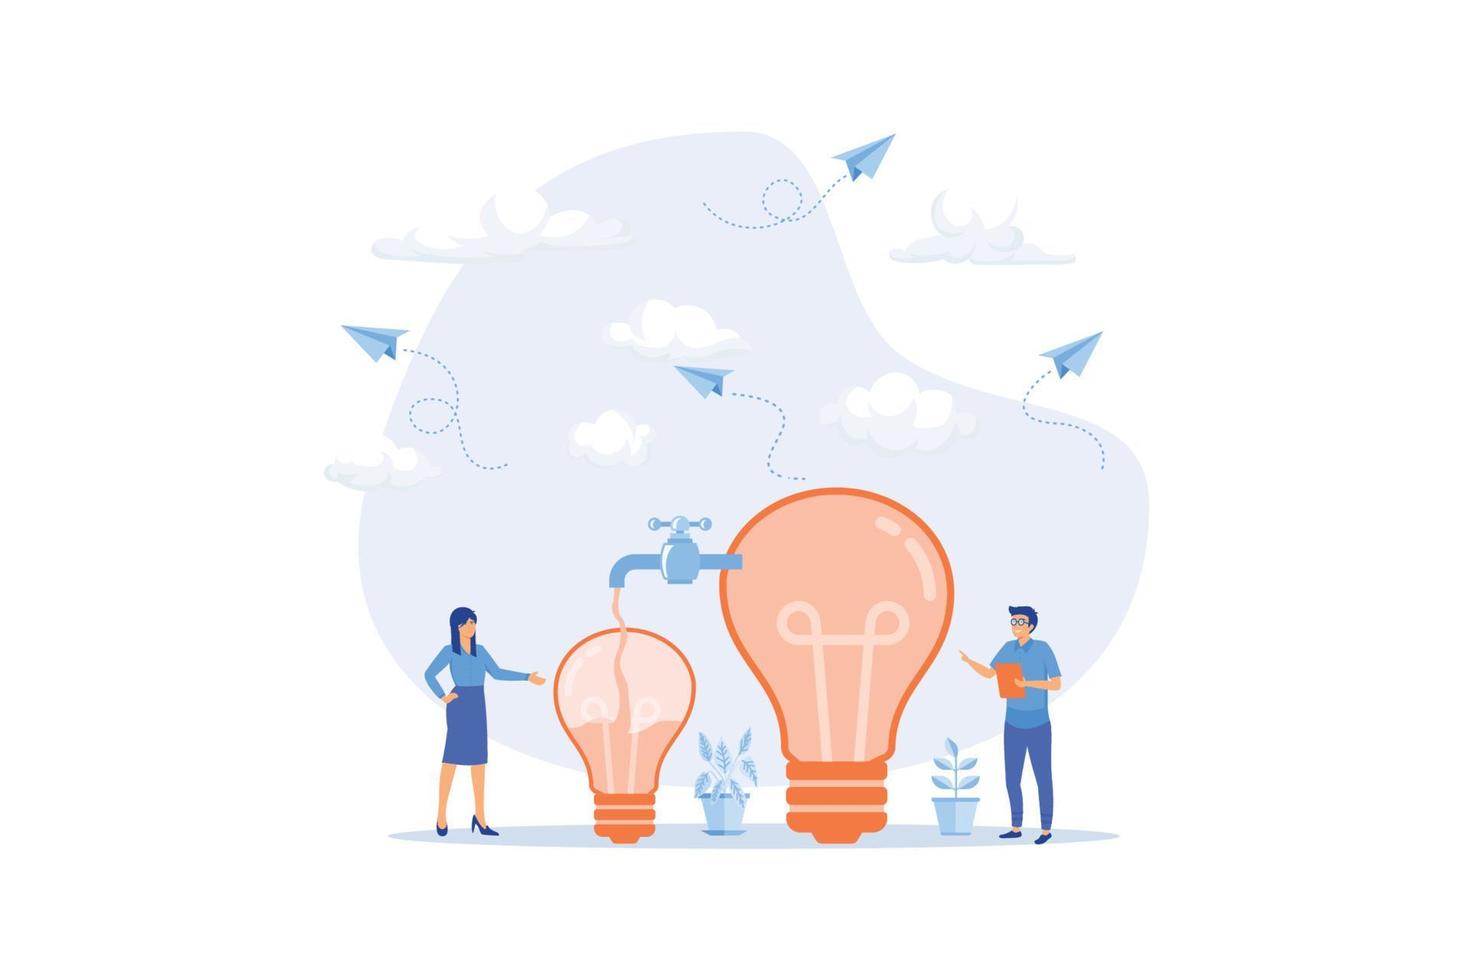 Sharing idea or knowledge sharing, transfer information or wisdom to employees or colleagues, creativity or innovation, learning new skills concept, flat vector modern illustration